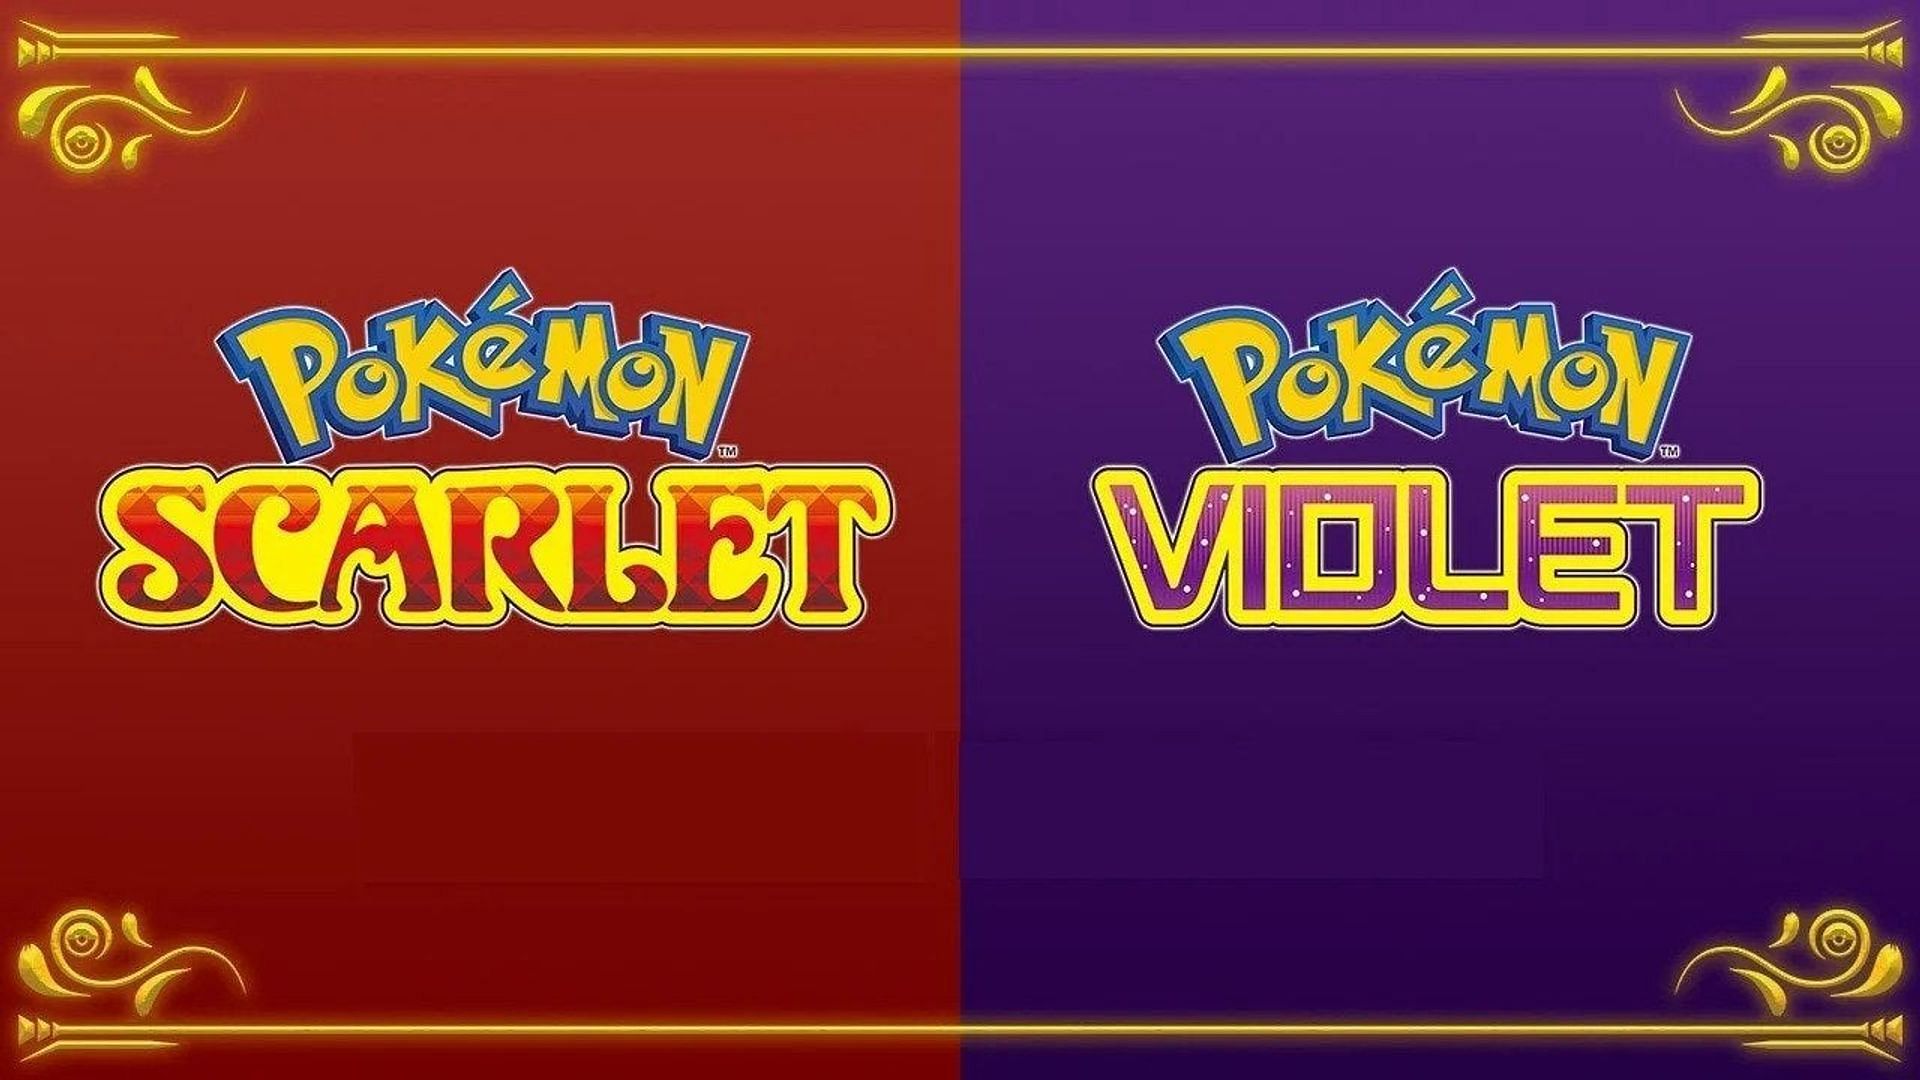 Official artwork for Pokemon Scarlet and Violet (Image via The Pokemon Company)